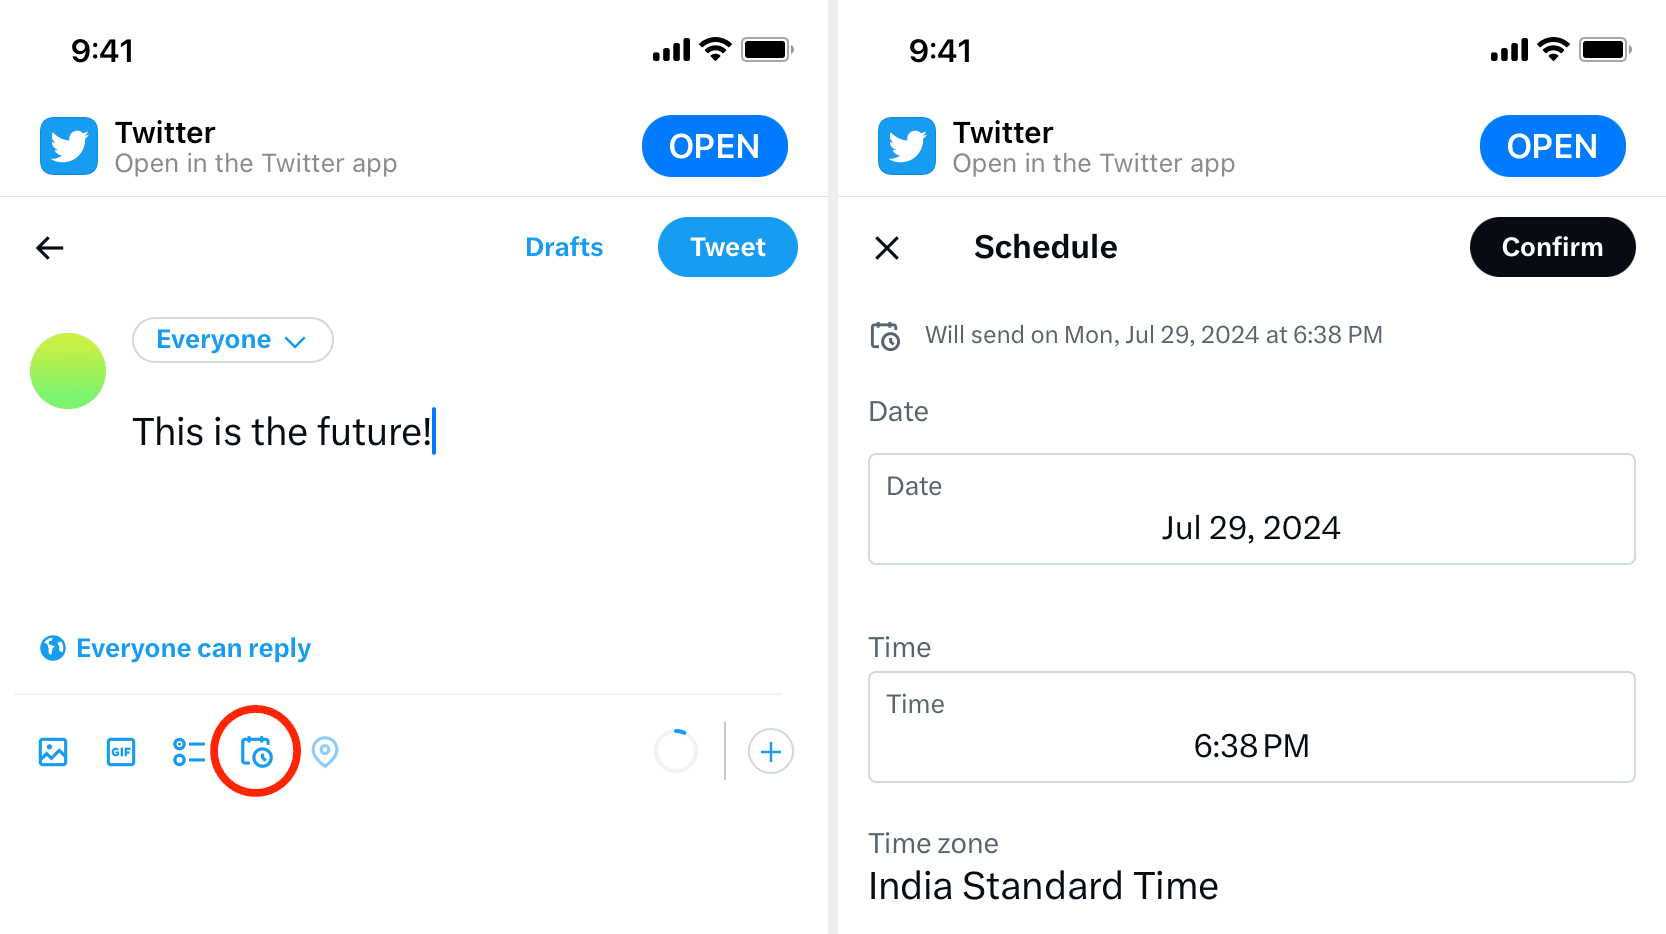 Schedule a tweet from your phone